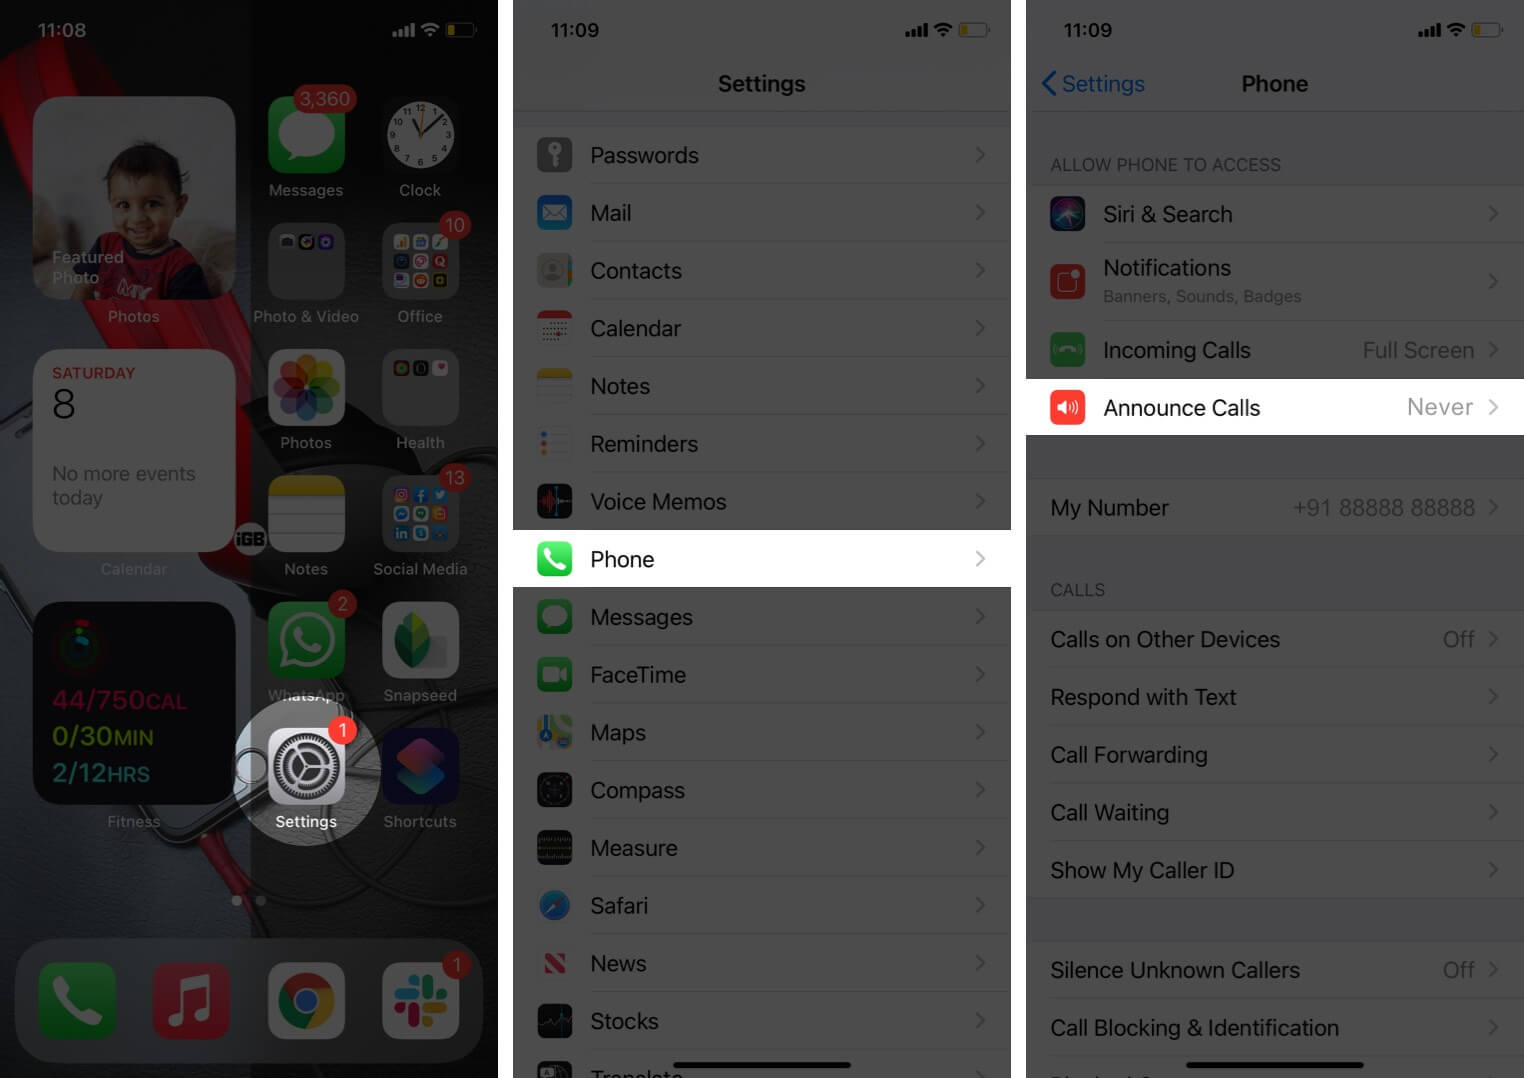 open settings tap on phone and then tap on announce calls on iphone